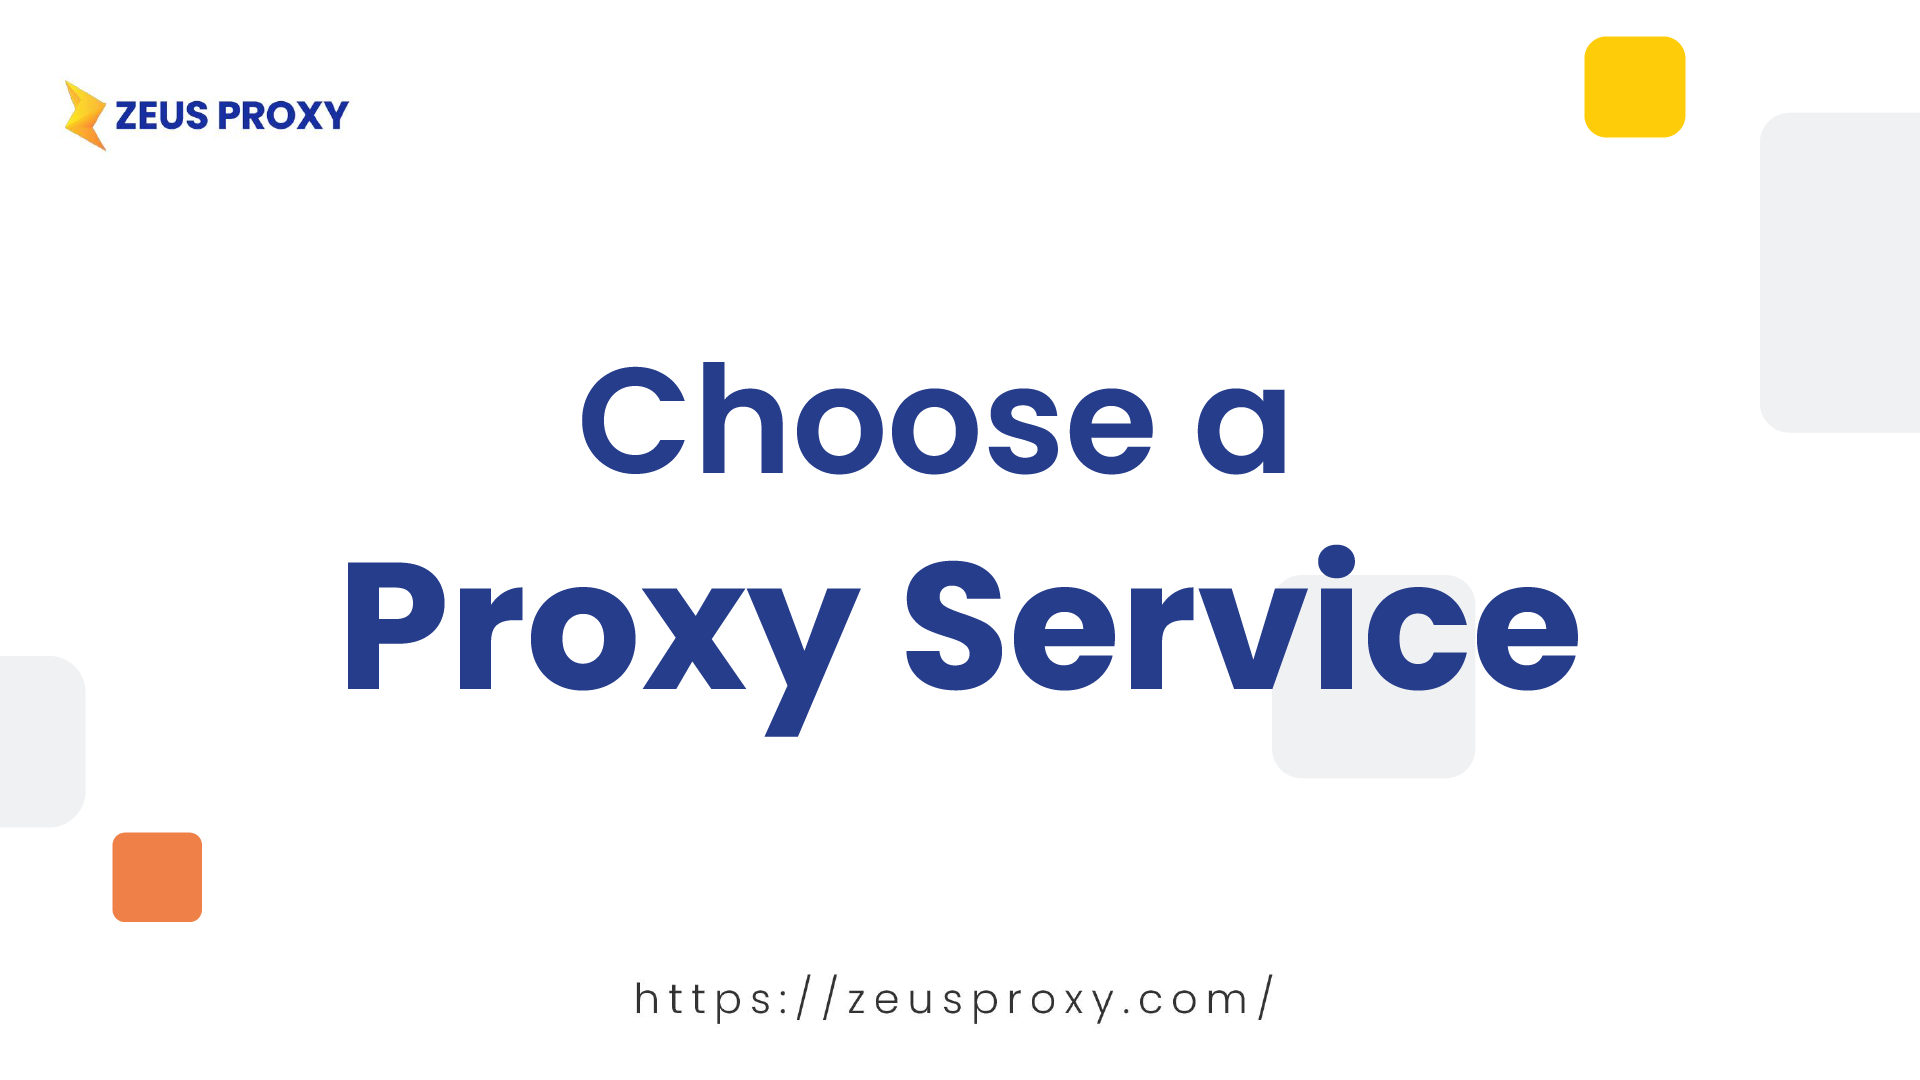 What should you avoid when choosing a proxy service?